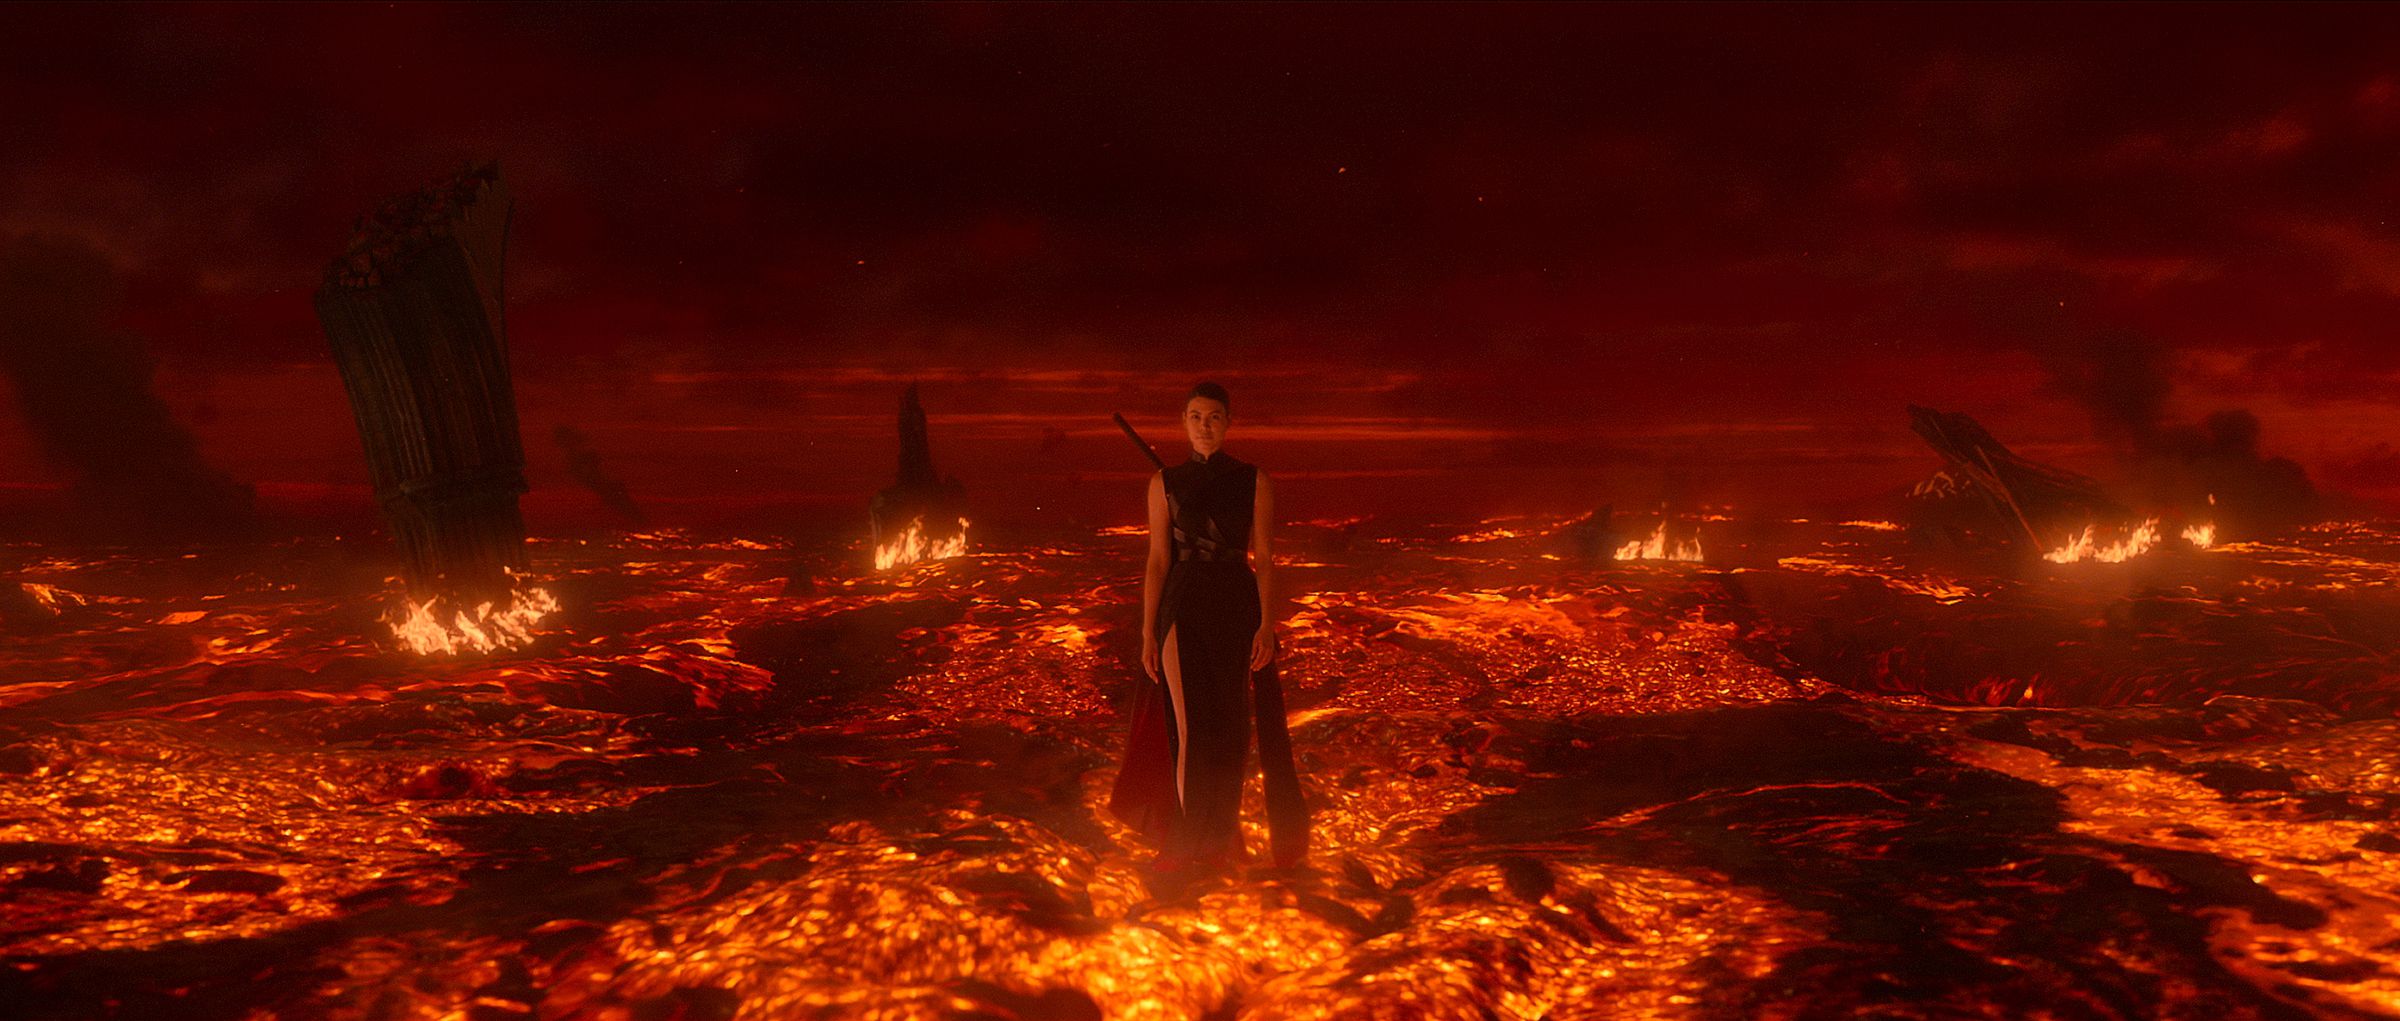 A woman in form fitting dress walking across a fiery landscape where the ground seems to be lava.